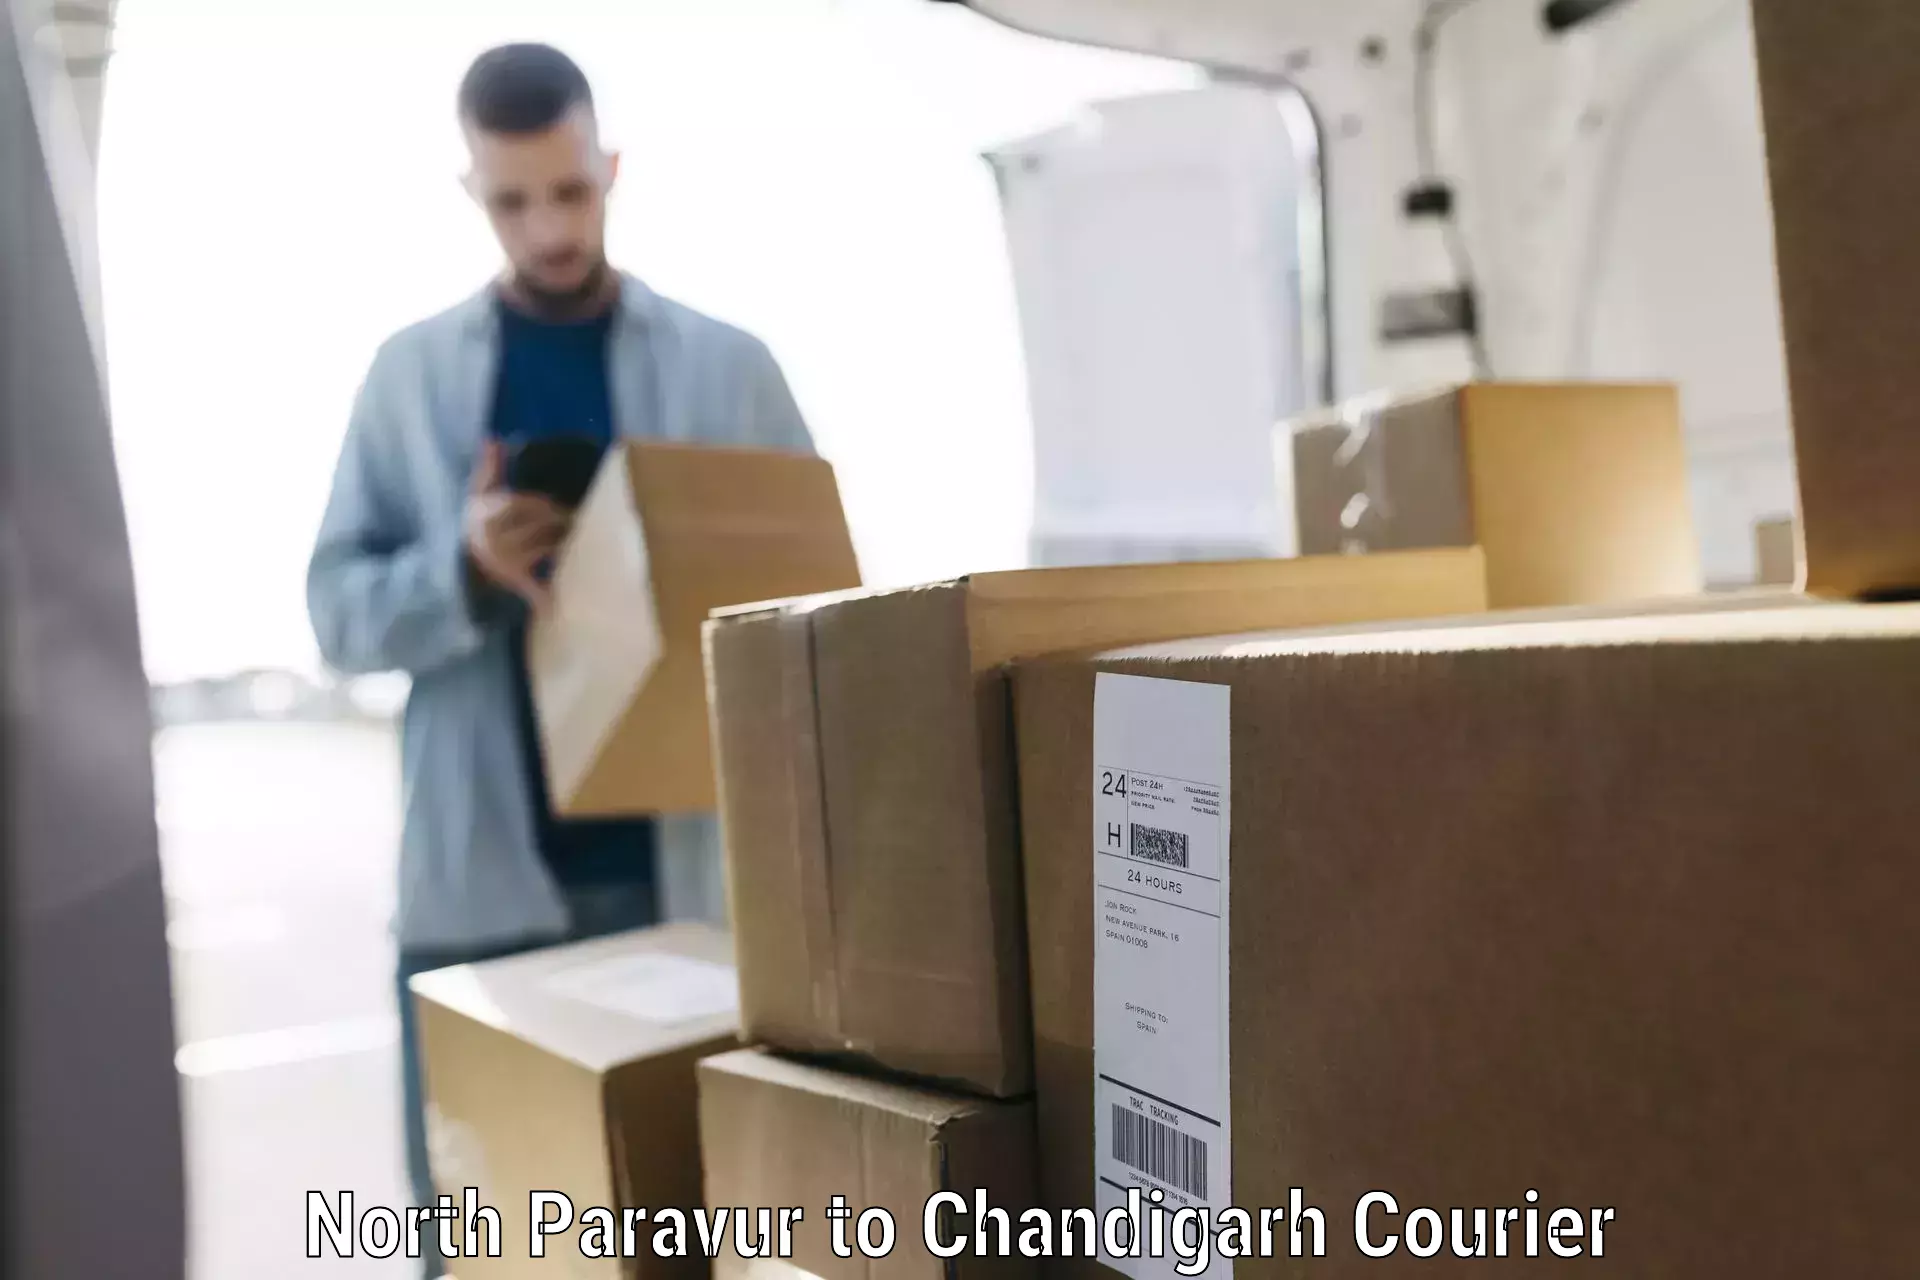 Baggage transport professionals North Paravur to Chandigarh